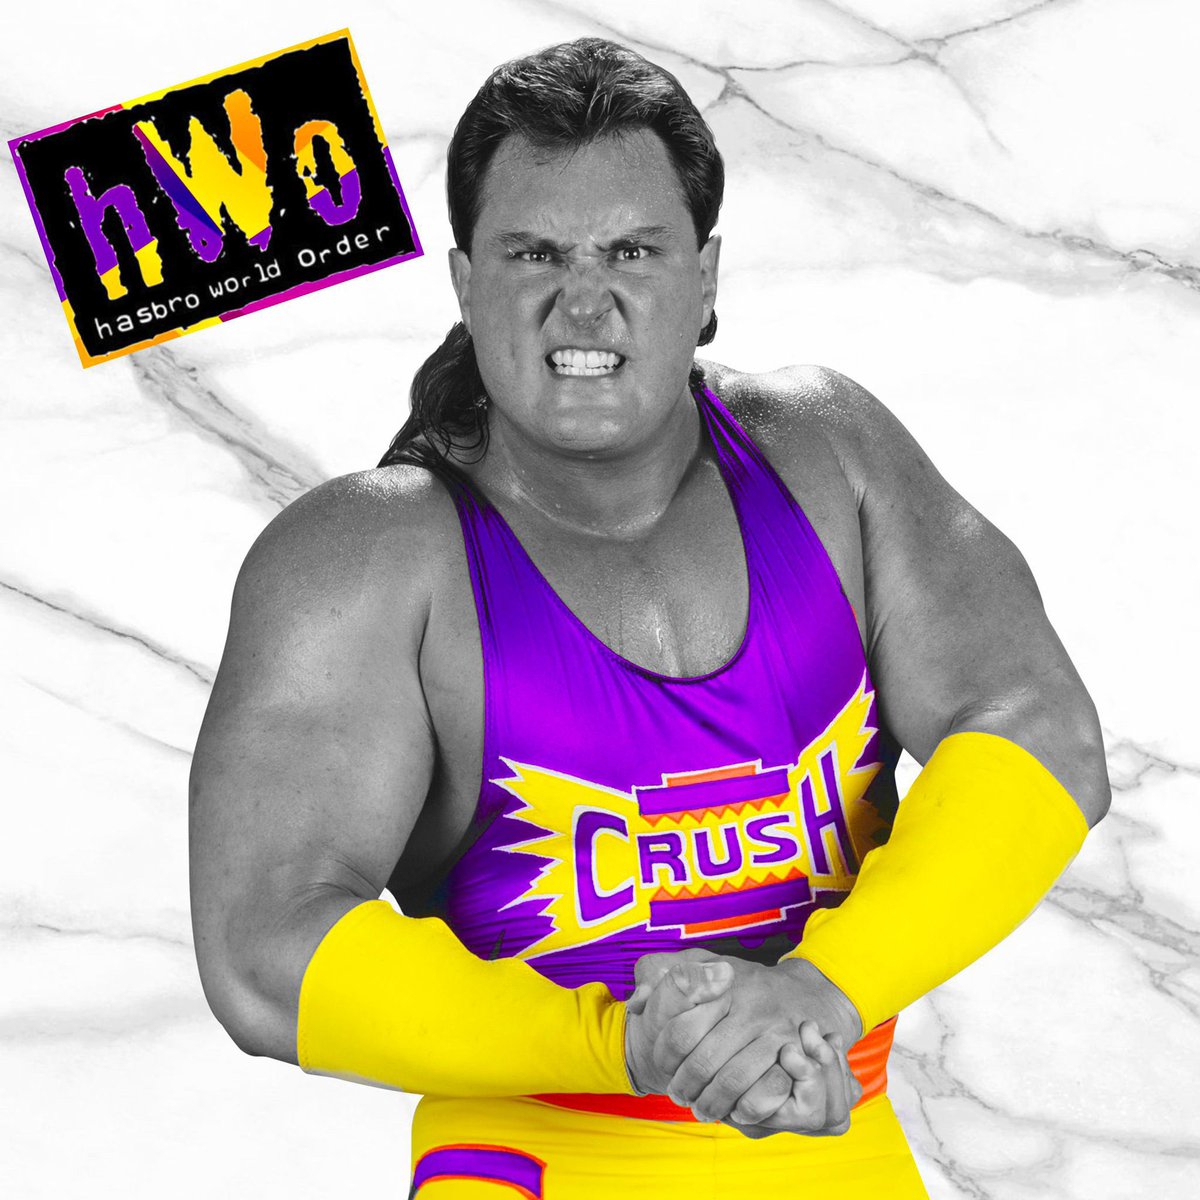 🟡🟣🟠🟡 CRUSH 🟡🟣🟠🟡 Happy Heavenly Birthday Brian Adams Please join us in remembering Brian by sharing any figures, cards, photos or merch of his today Thank you @RealBryanClark for all you do to keep Brian’s memory alive #hWo #Crush #KroniK #Demolition #BrianAdams